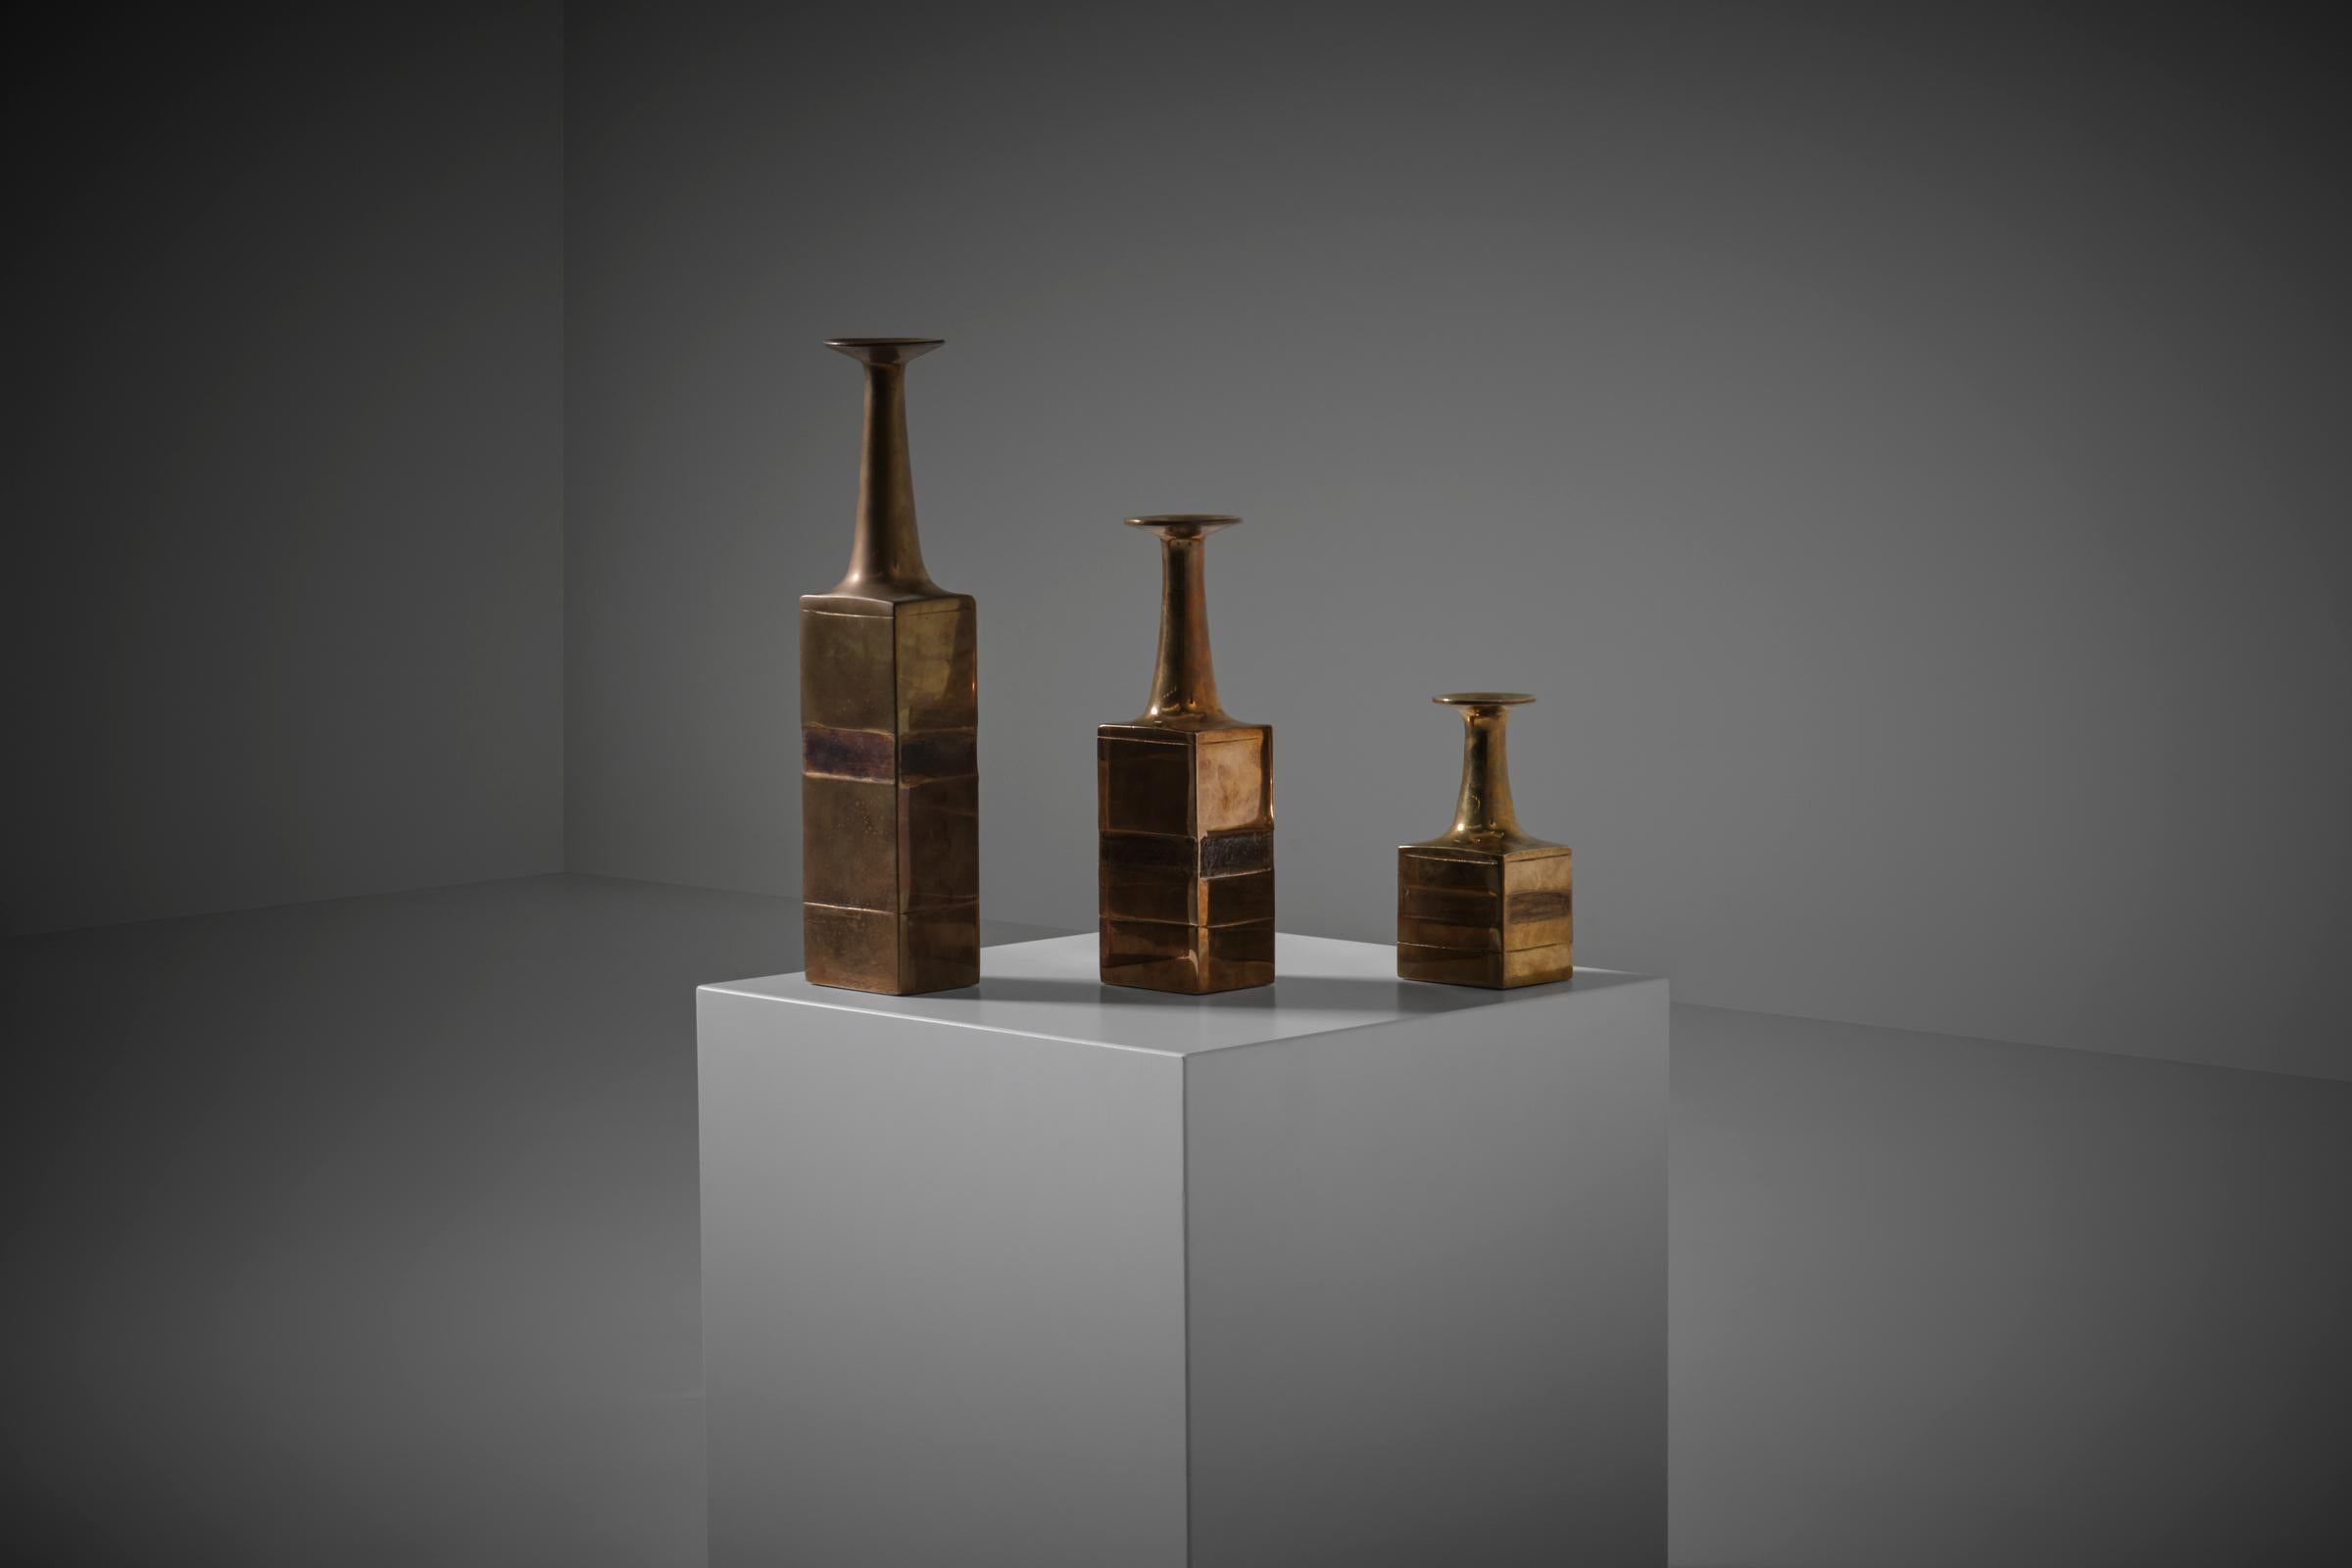 Sculptural bronze vases by Bruno Gambone (1936 -2021), Italy 1970s. Beautiful quadrangular shaped vases with nicely tapered neck and elegant tulip edges, made in cast bronze with a nice warm patina. The vases show an interesting linear textured